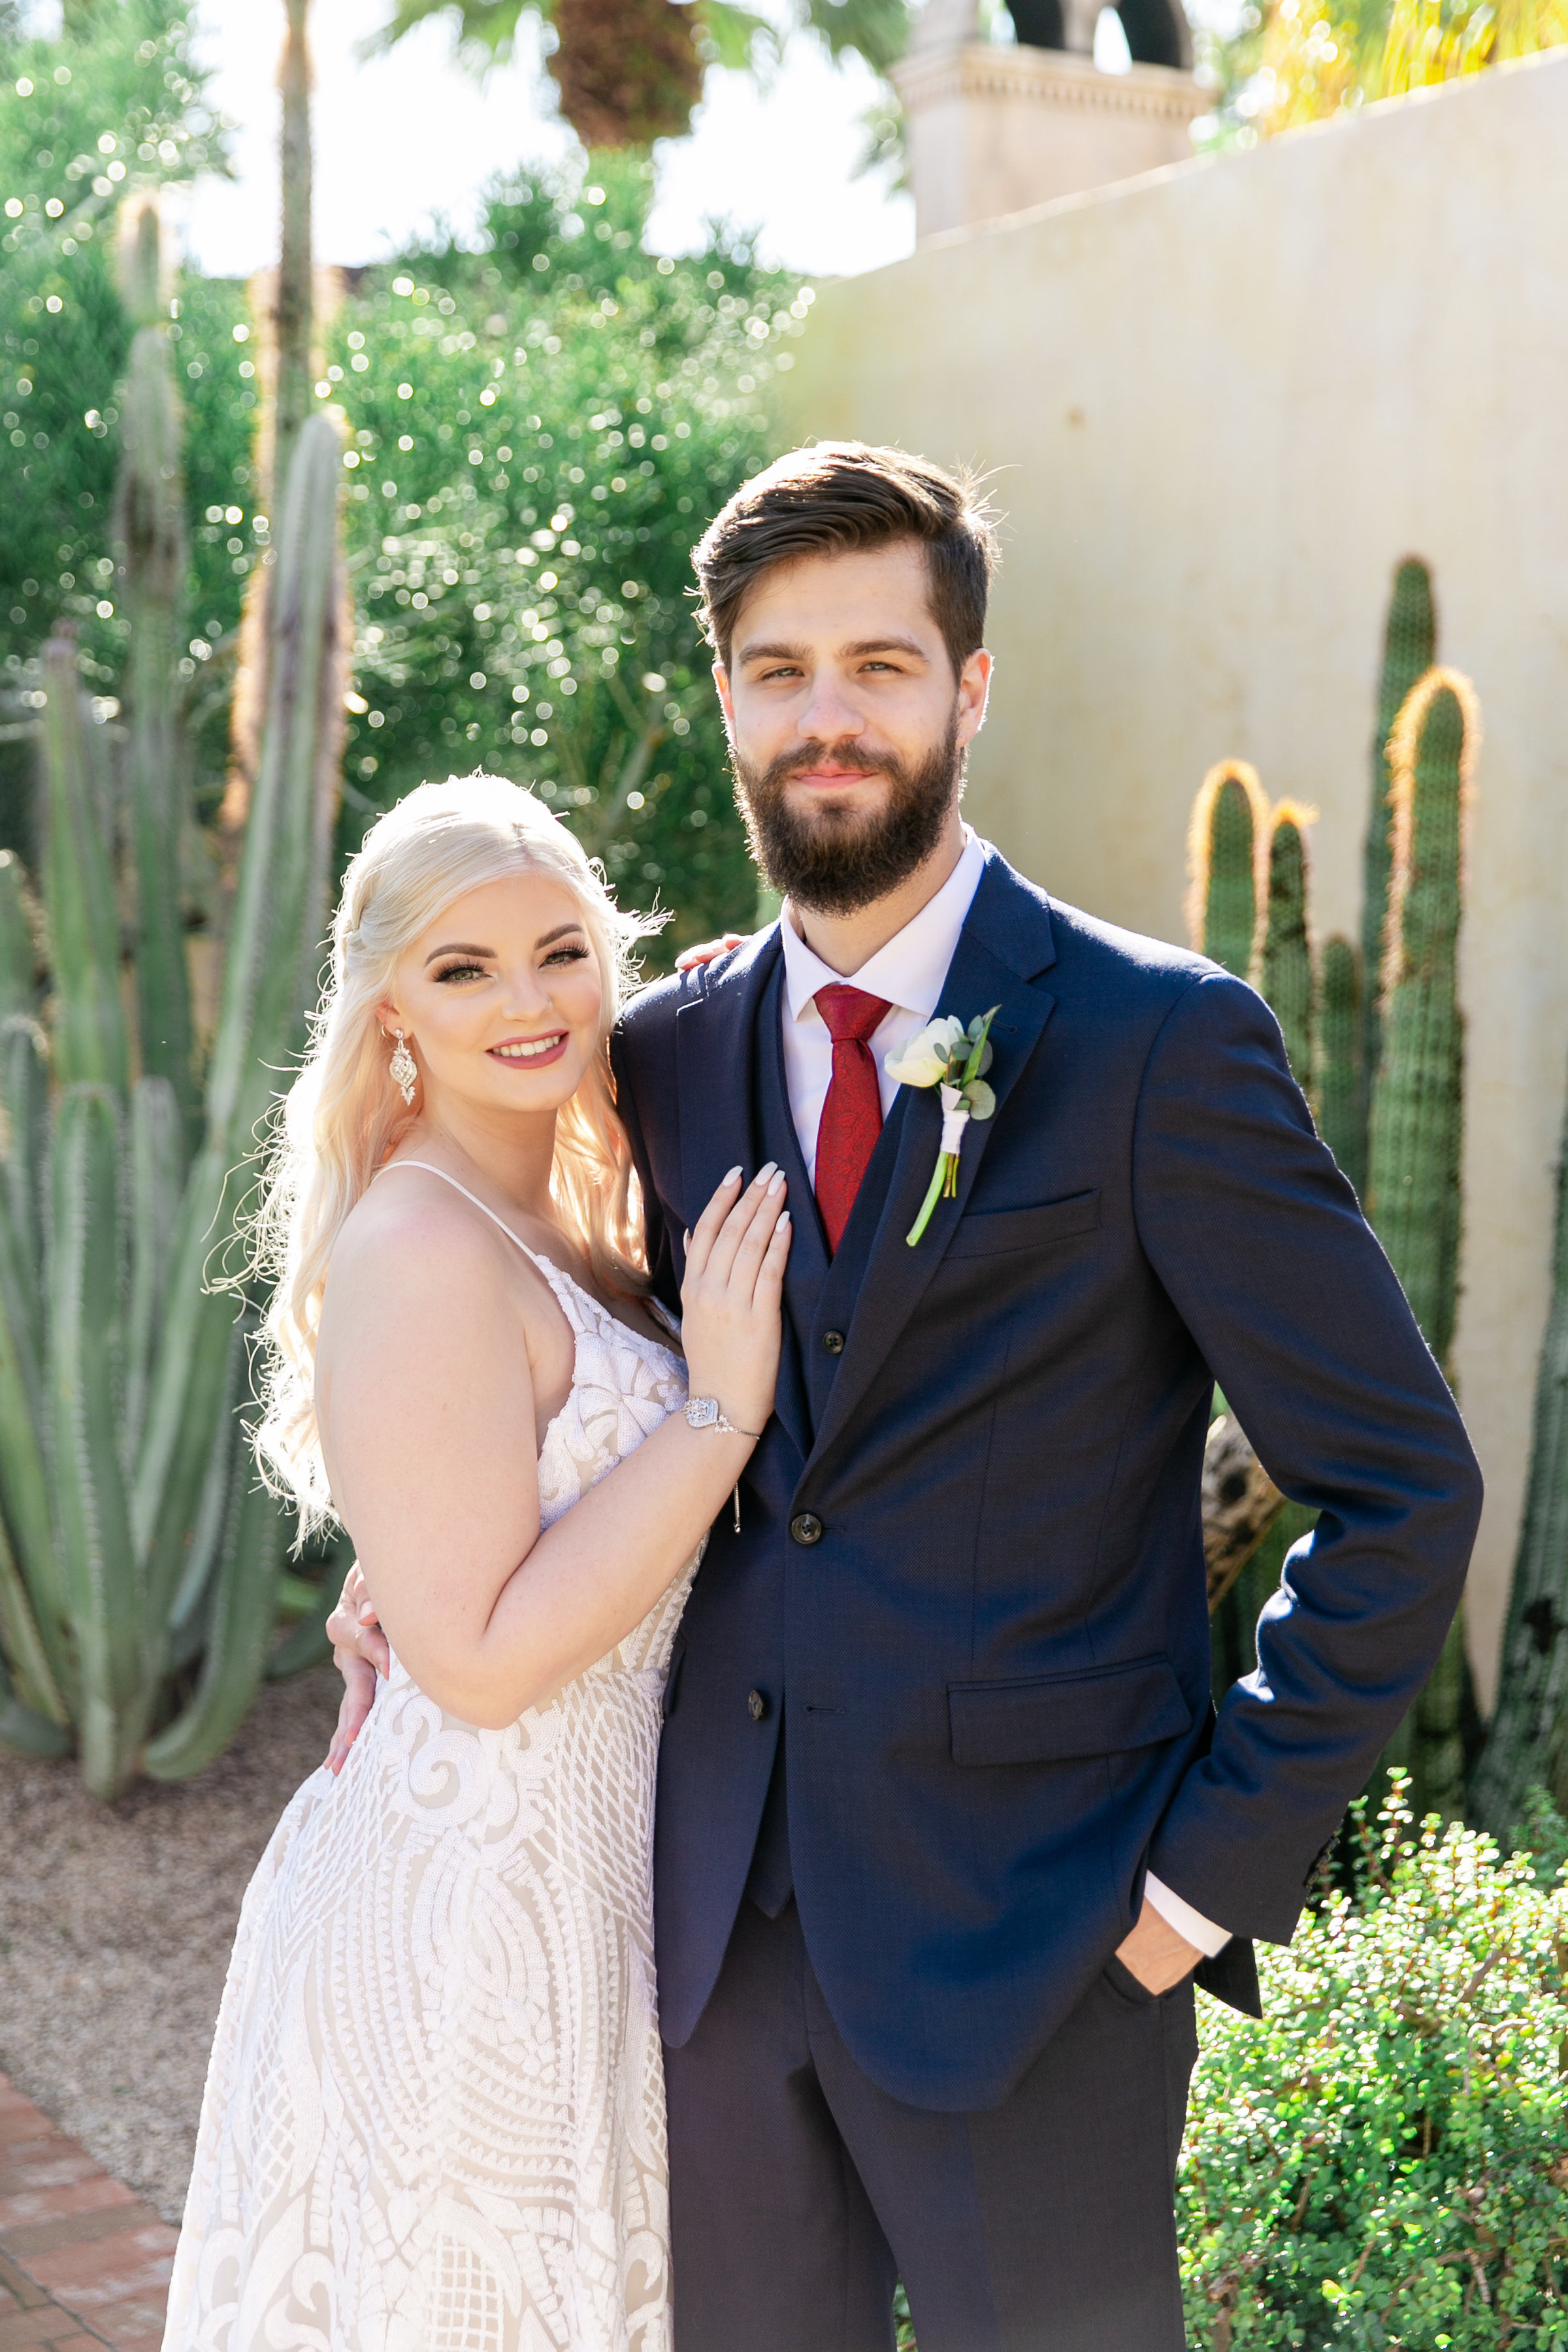 Karlie Colleen Photography - The Royal Palms Wedding - Some Like It Classic - Alex & Sam-149